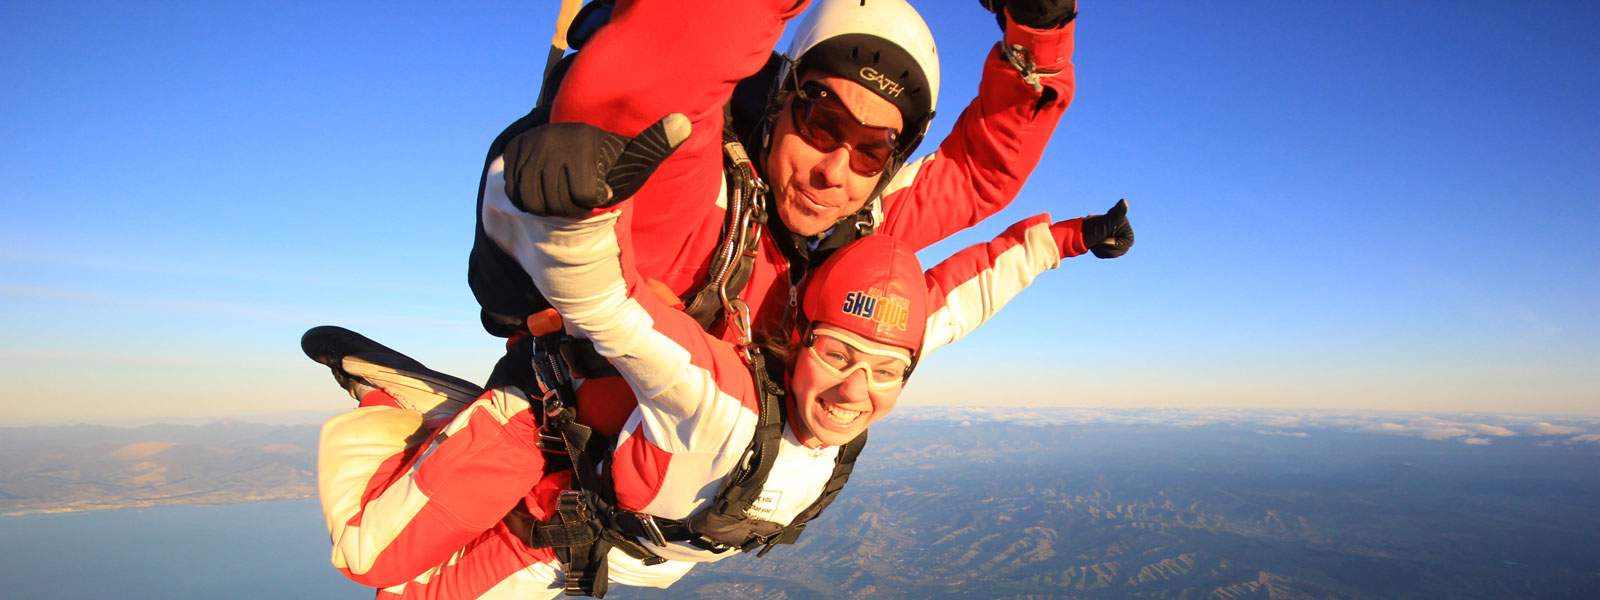 two people mid-skydive